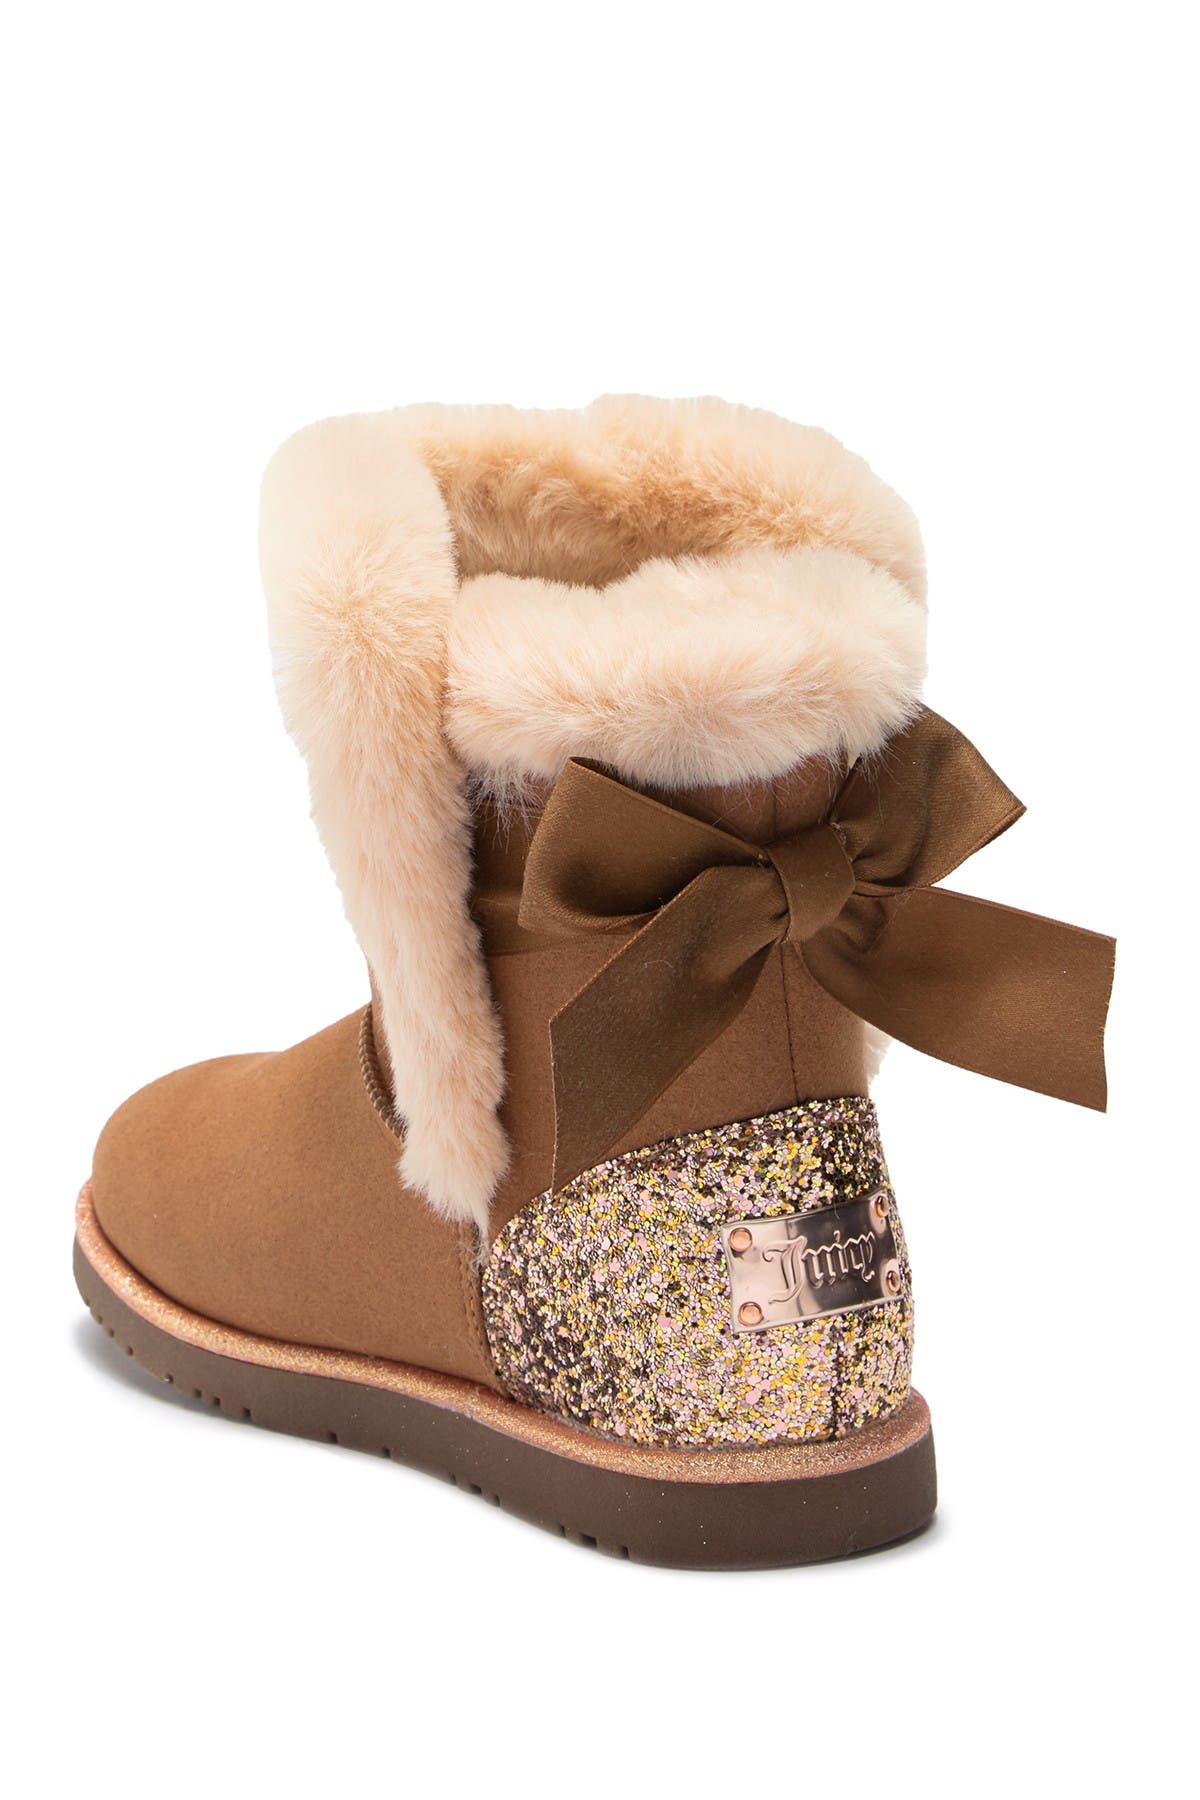 juicy couture fur boots